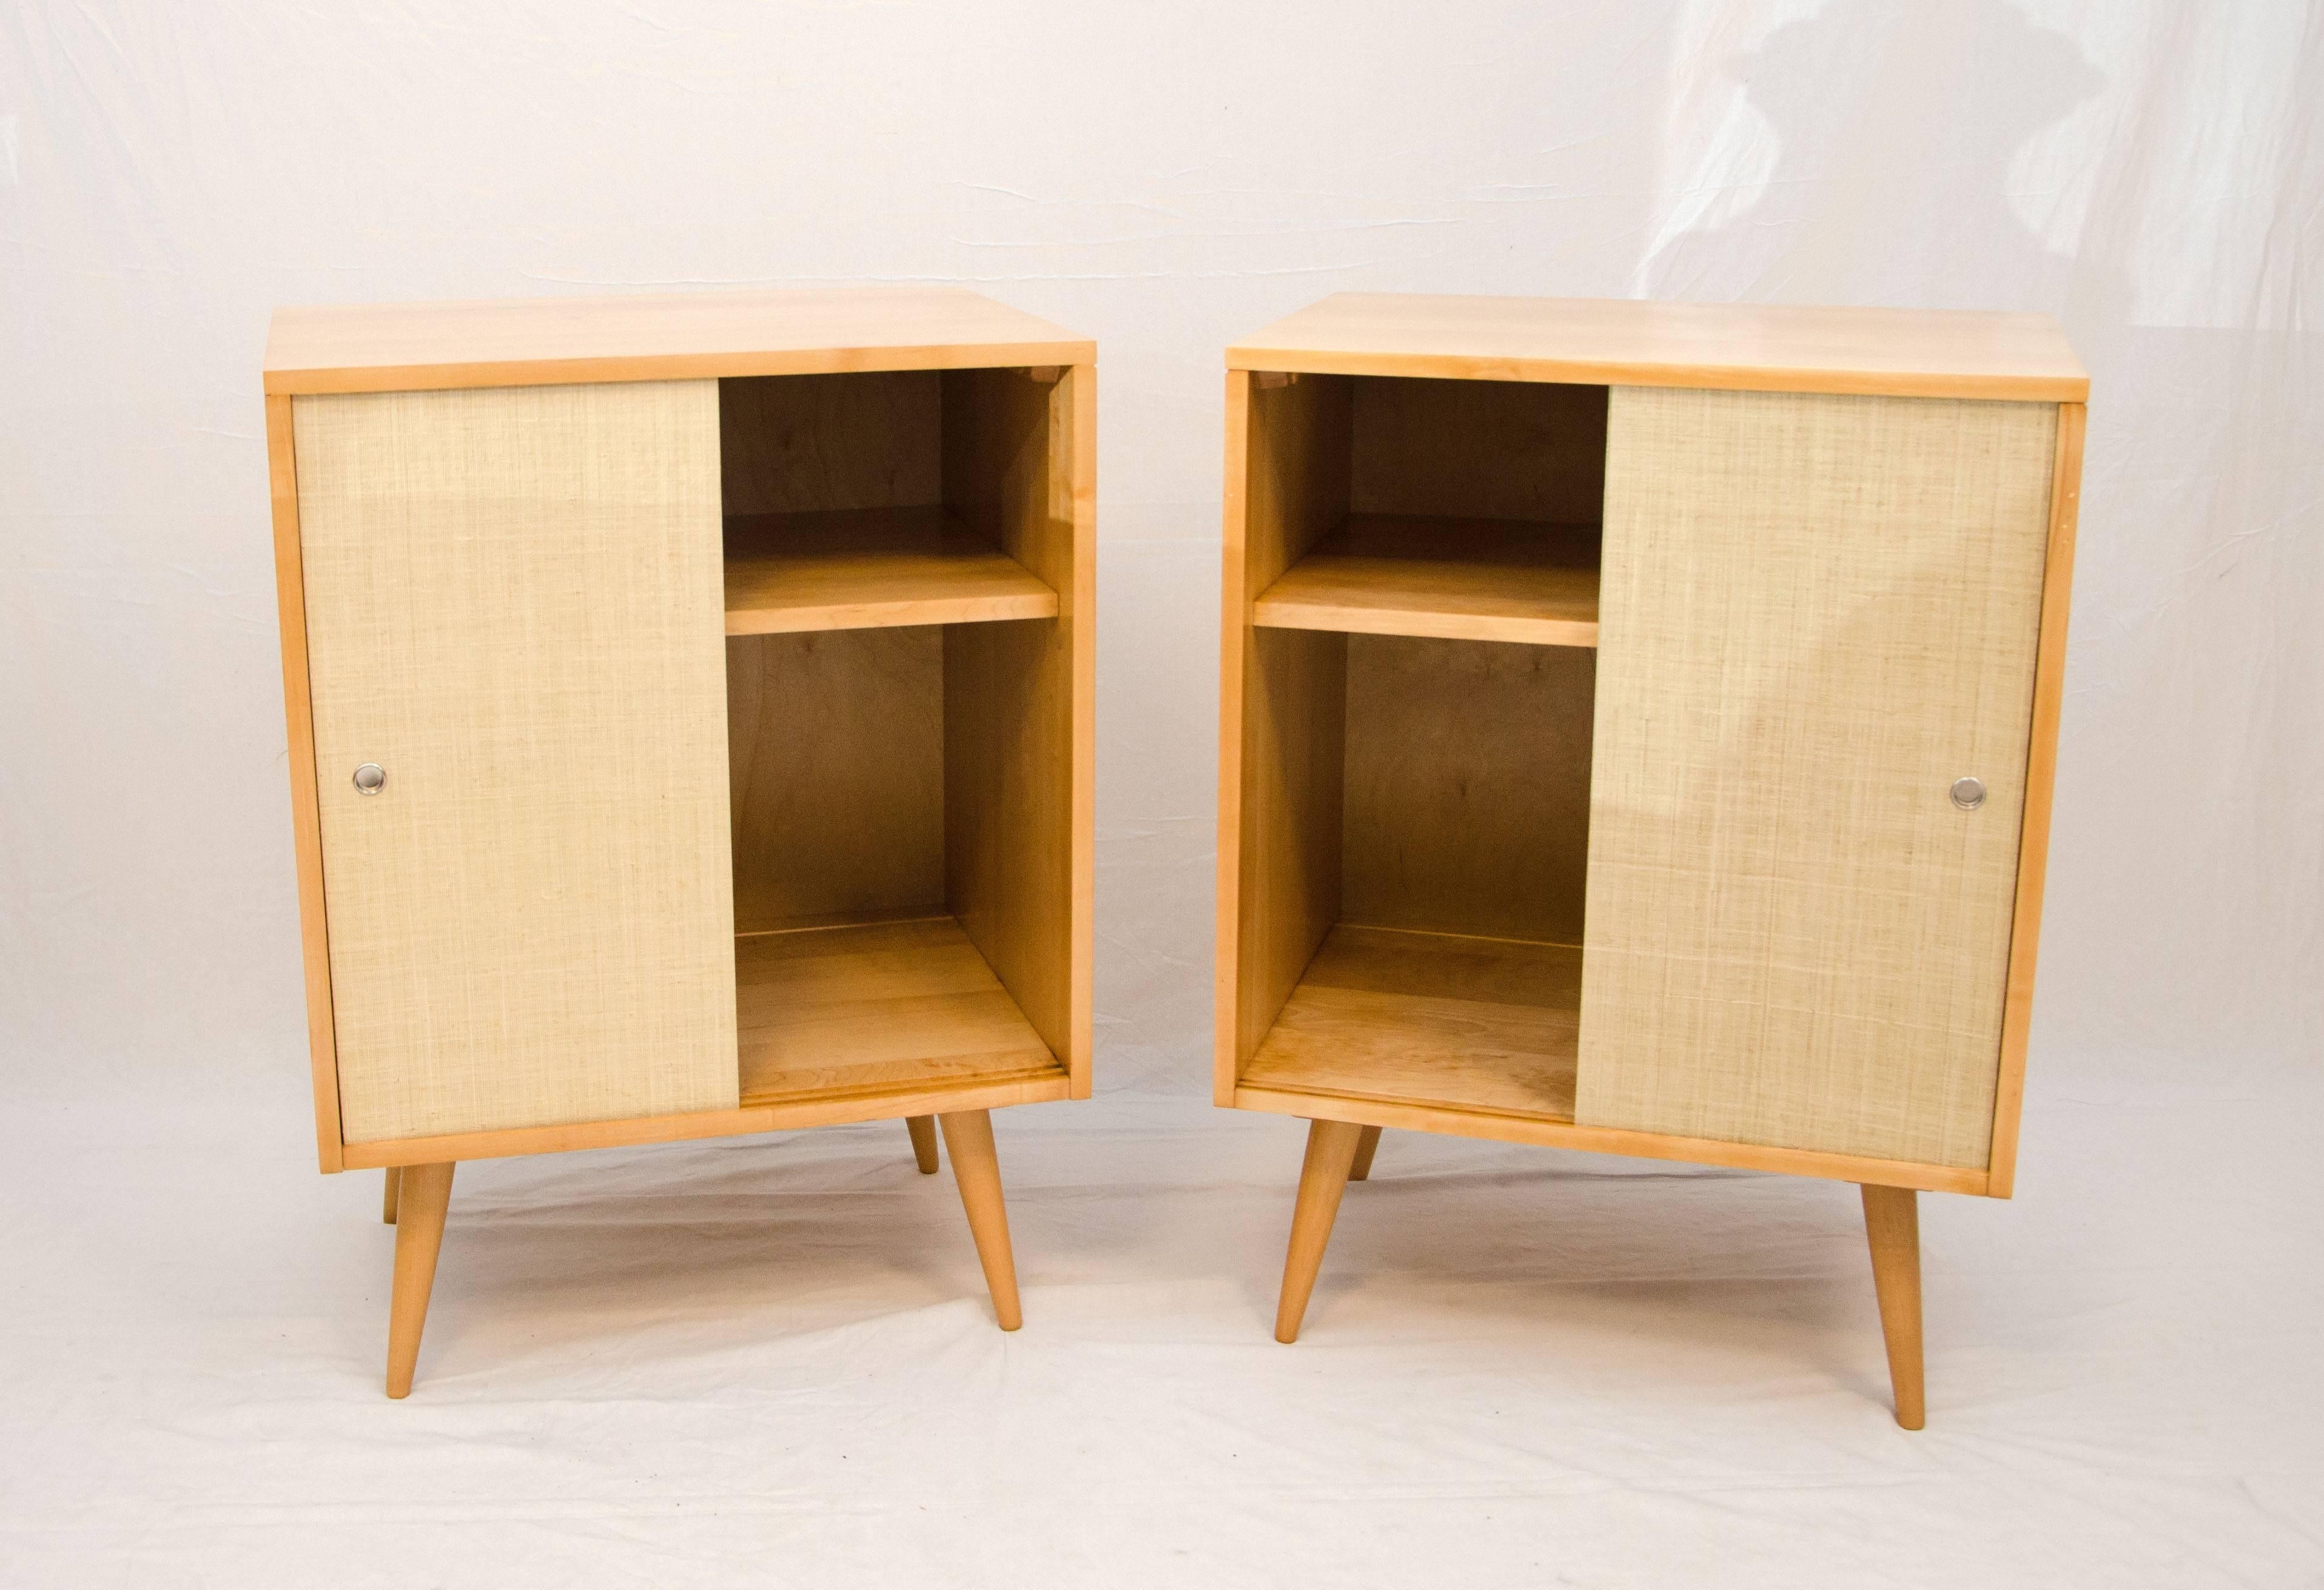 Nice pair of cabinets designed by Paul McCobb. One cabinet has evidence of previous doors that were attached by screws. Matching sliding doors with vintage grasscloth paper were made.